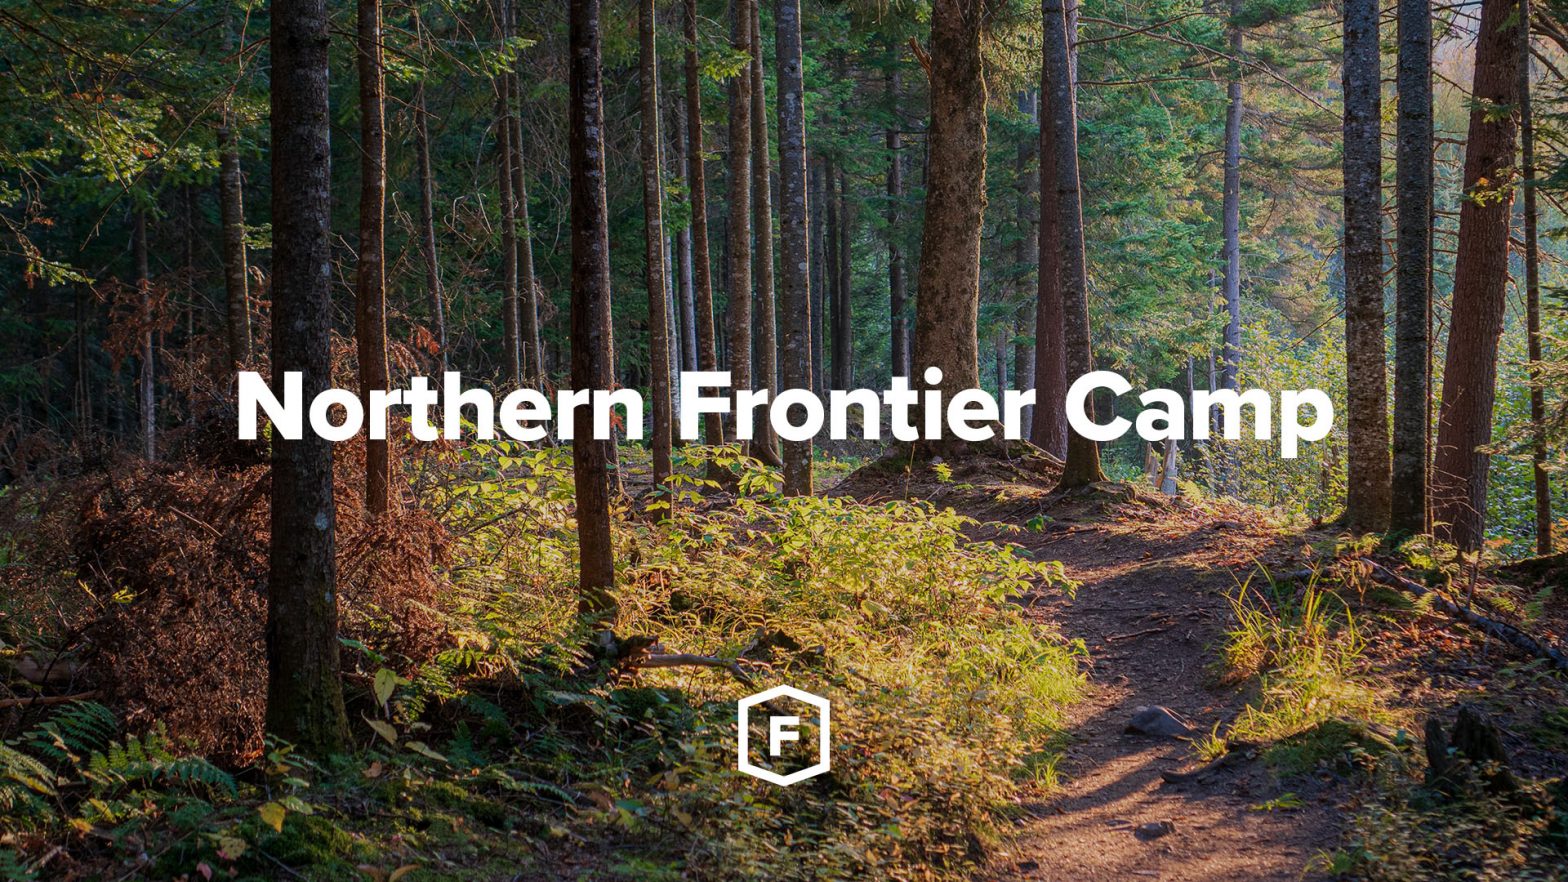 Northern Frontier Camp image